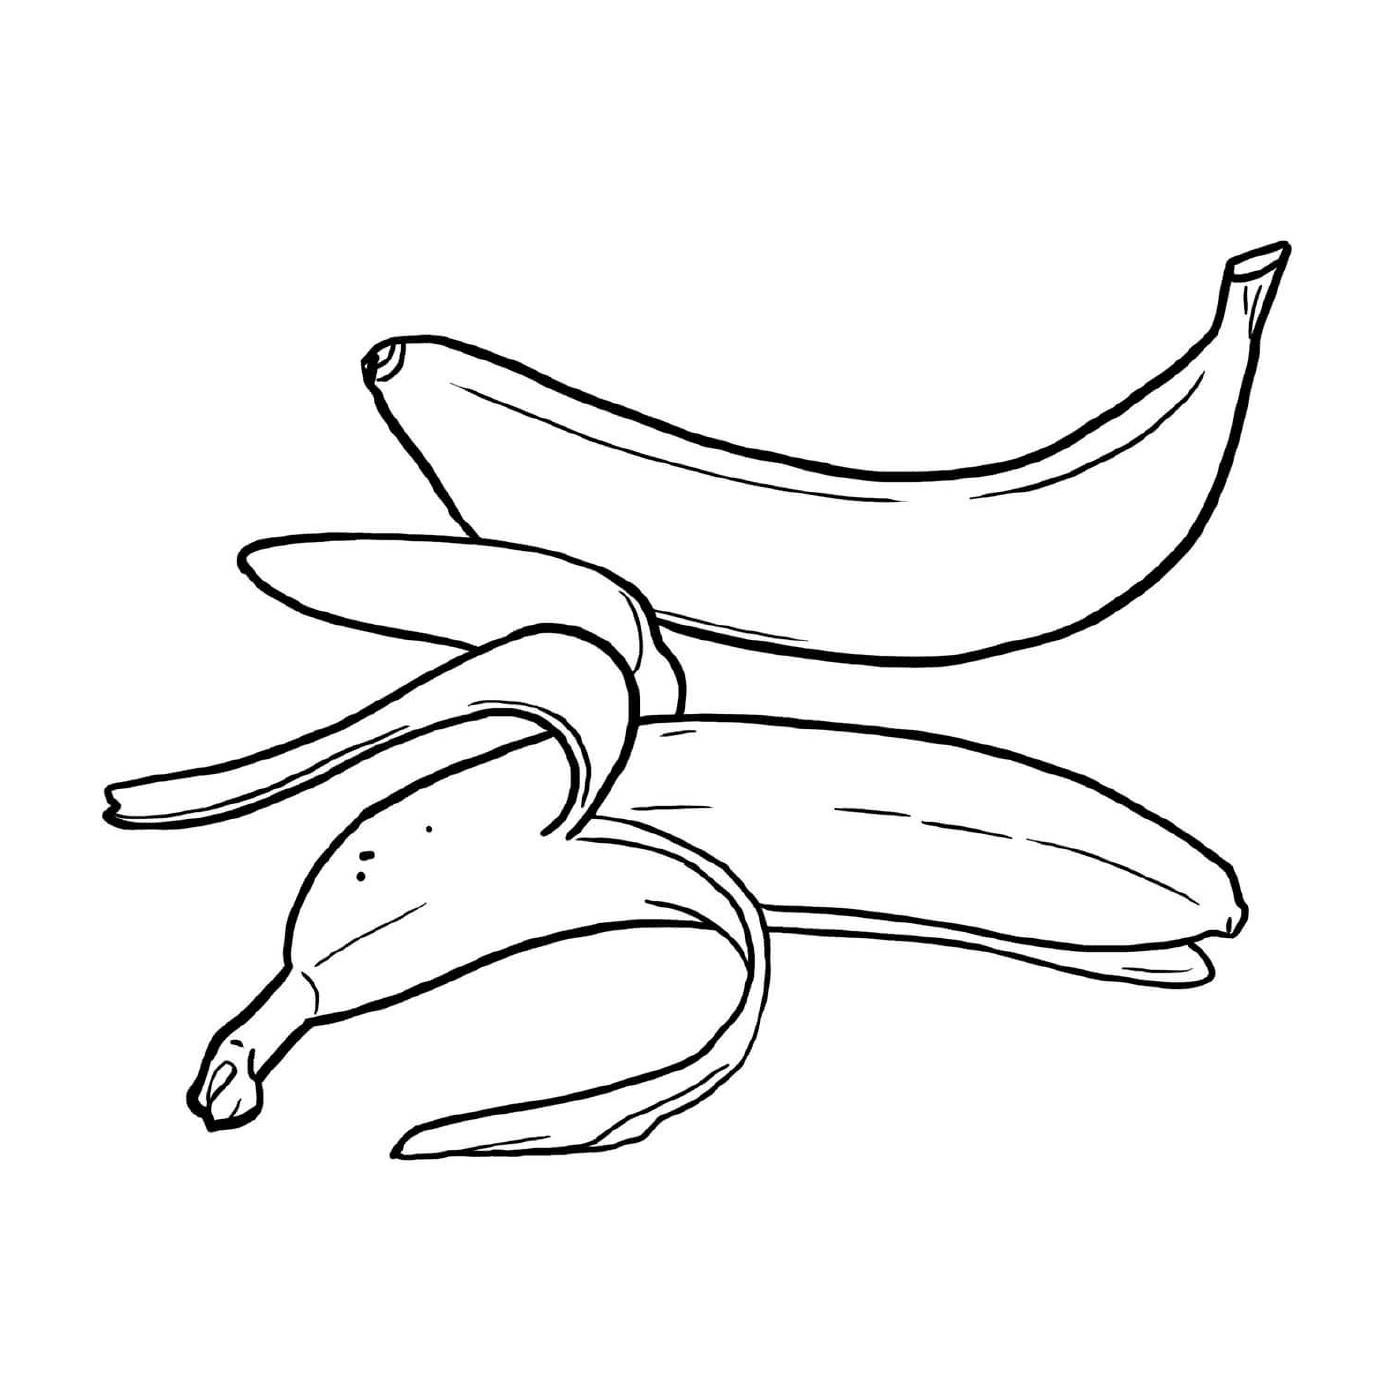  Several bananas placed on a table 